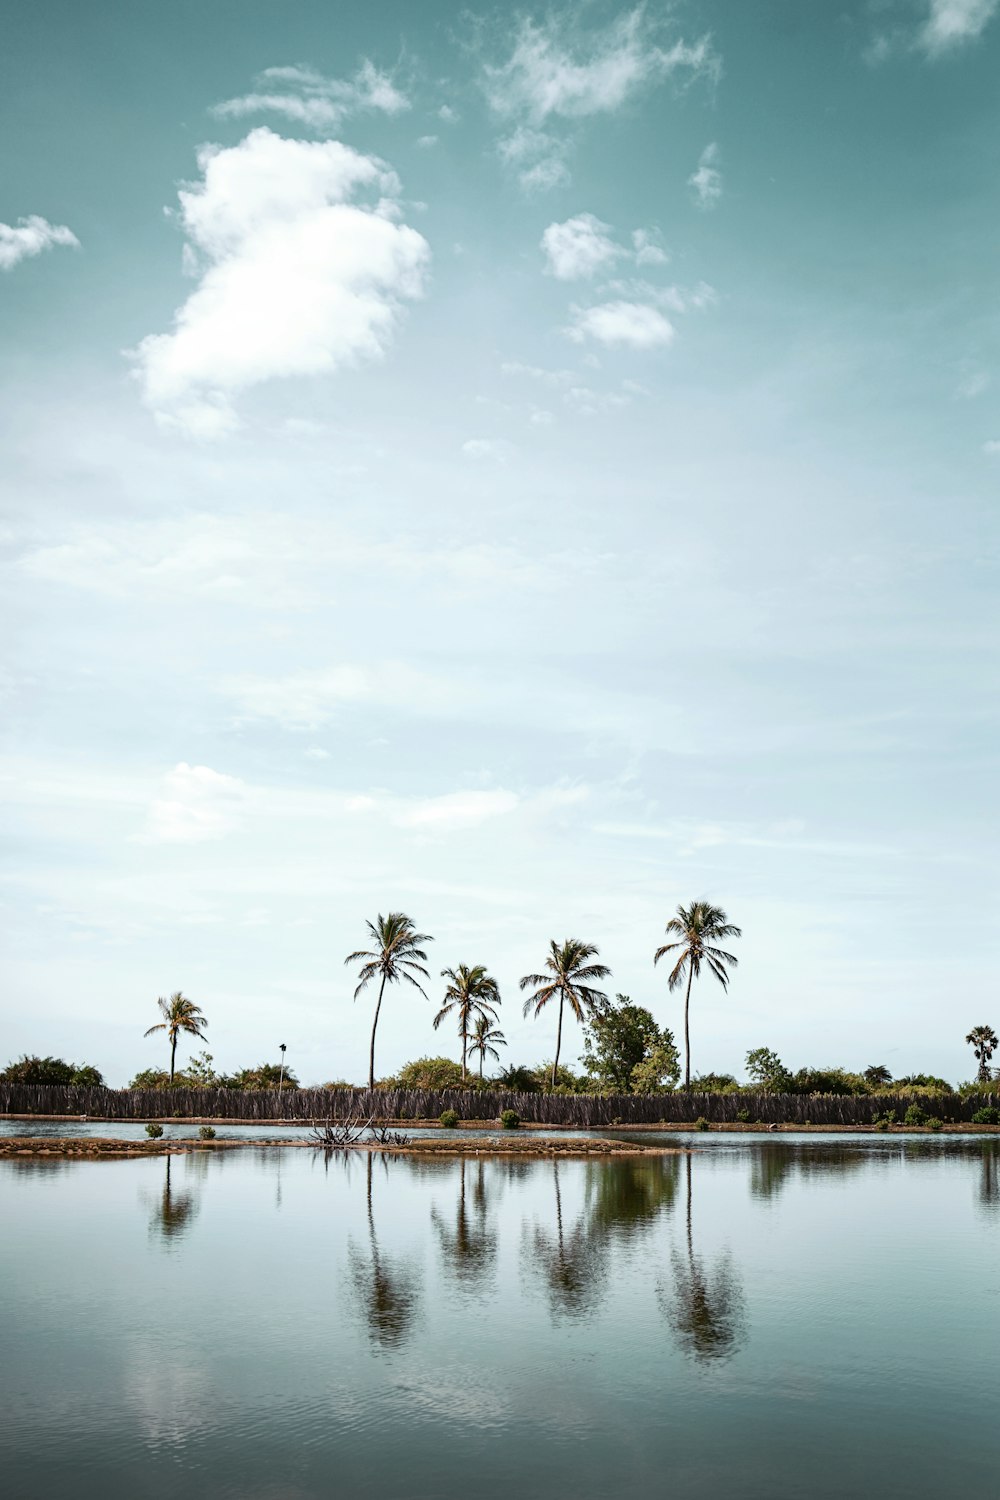 green coconut trees near body of water under blue sky and white clouds during daytime